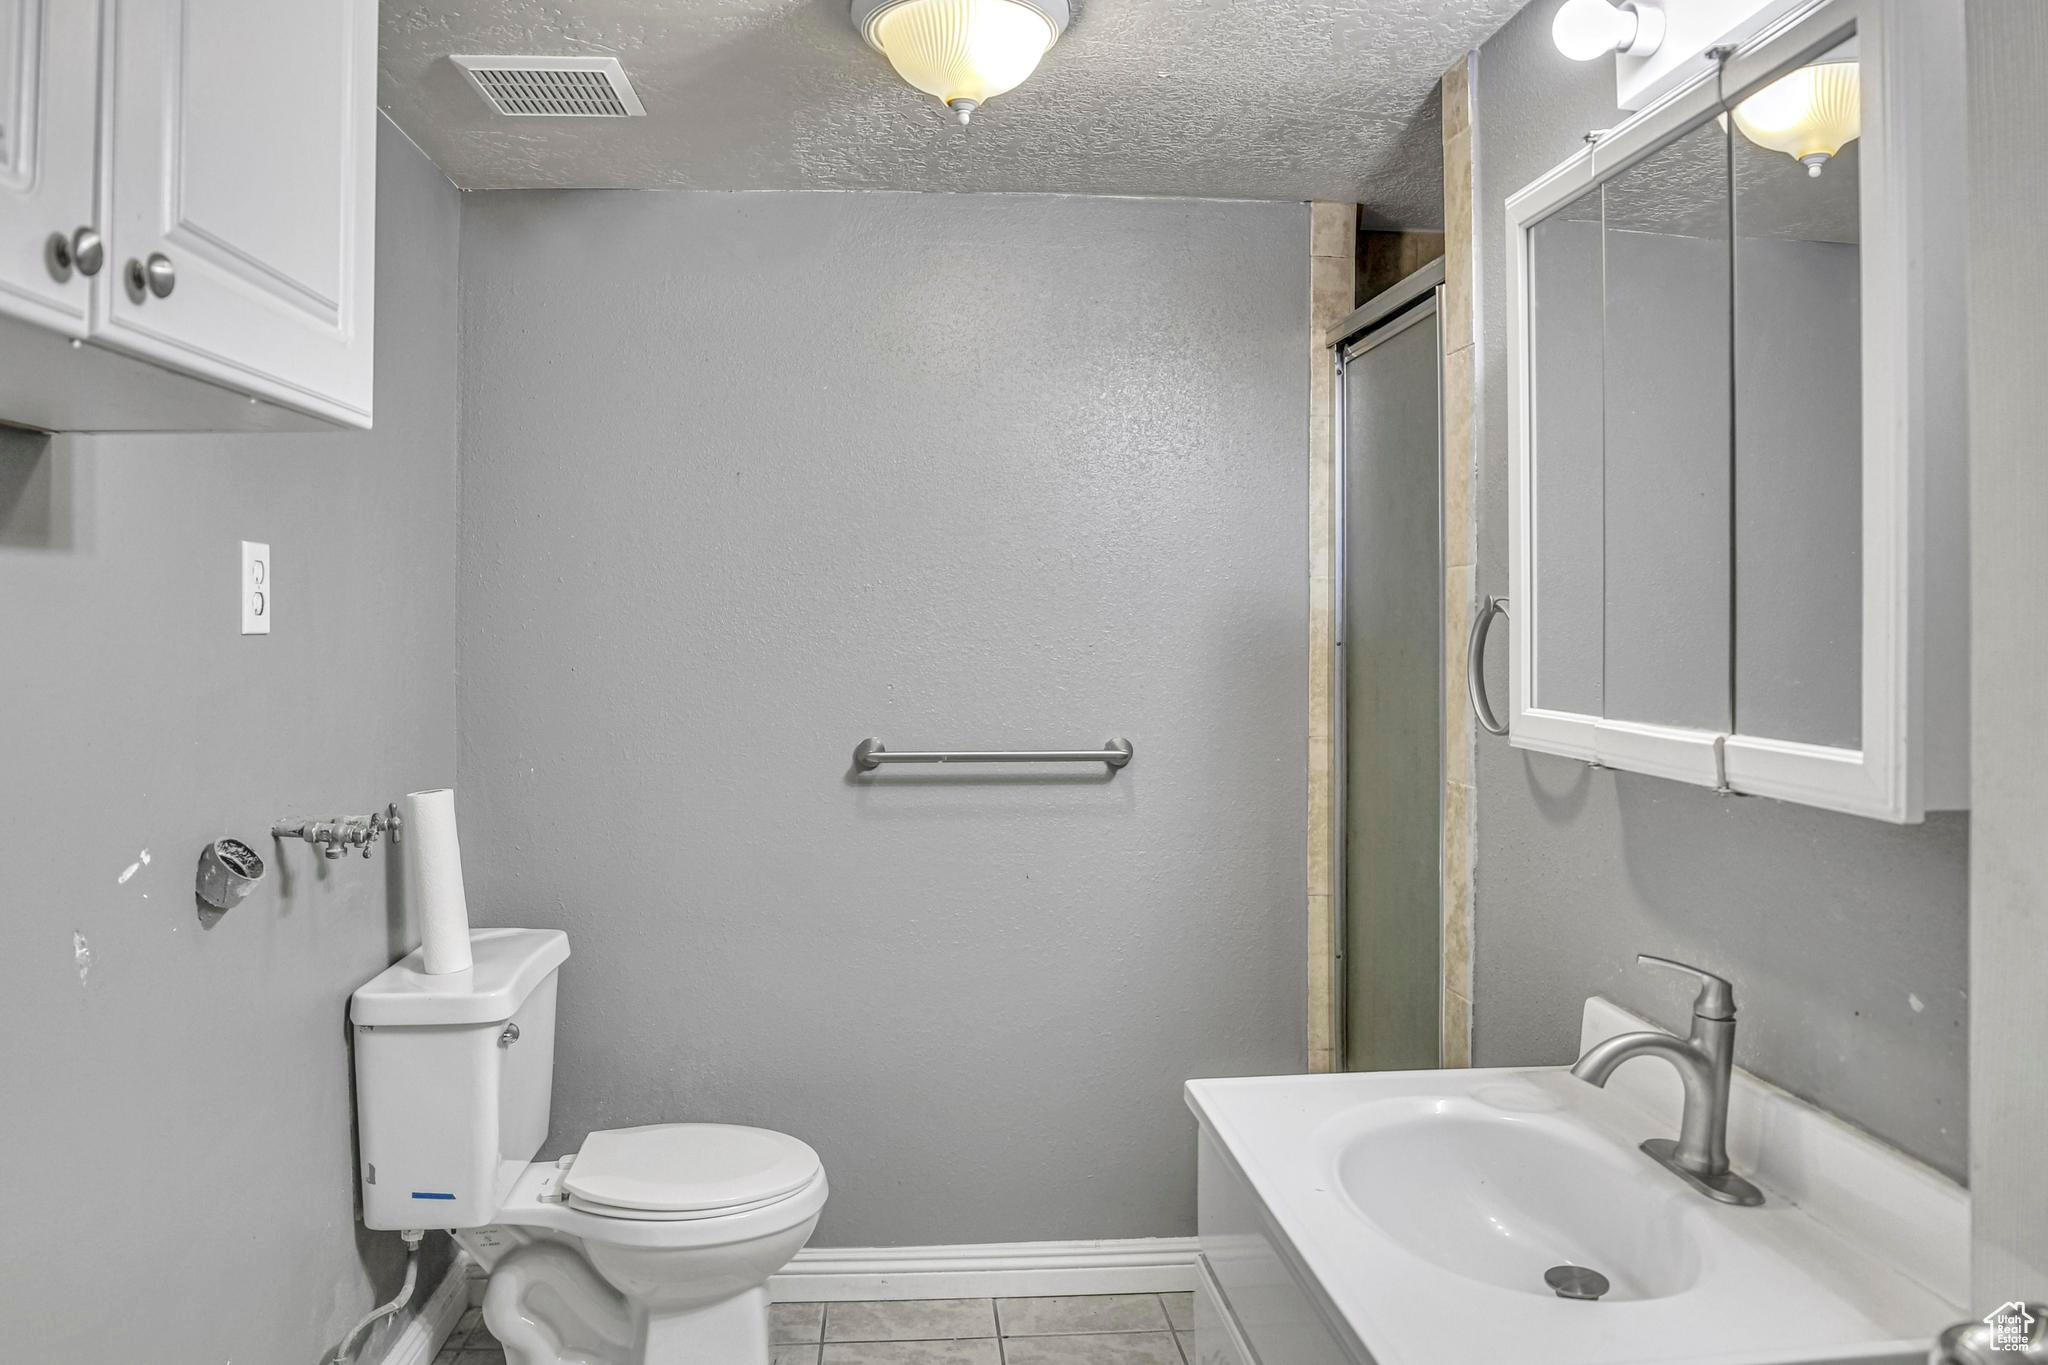 Bathroom 3 with a textured ceiling, toilet, tile floors, and sink